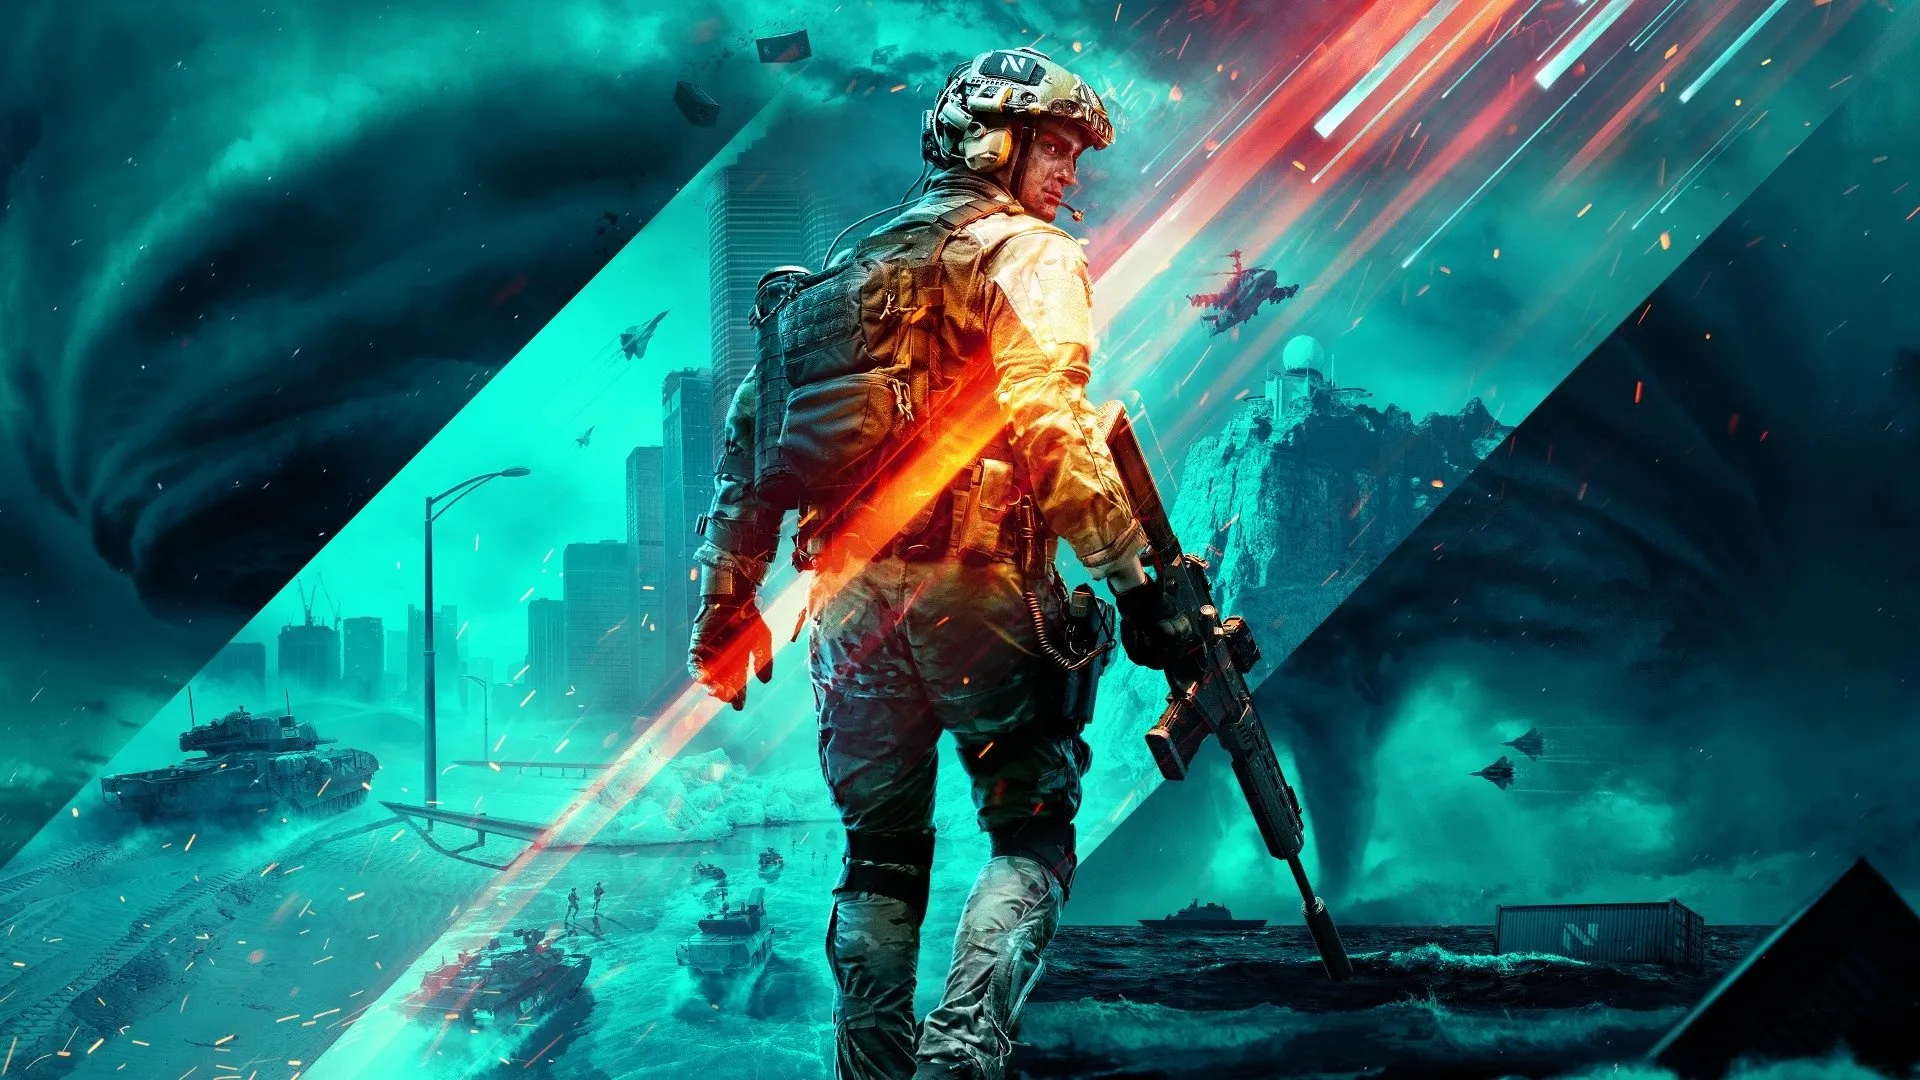 Battlefield 4 stats will carry over to next gen consoles